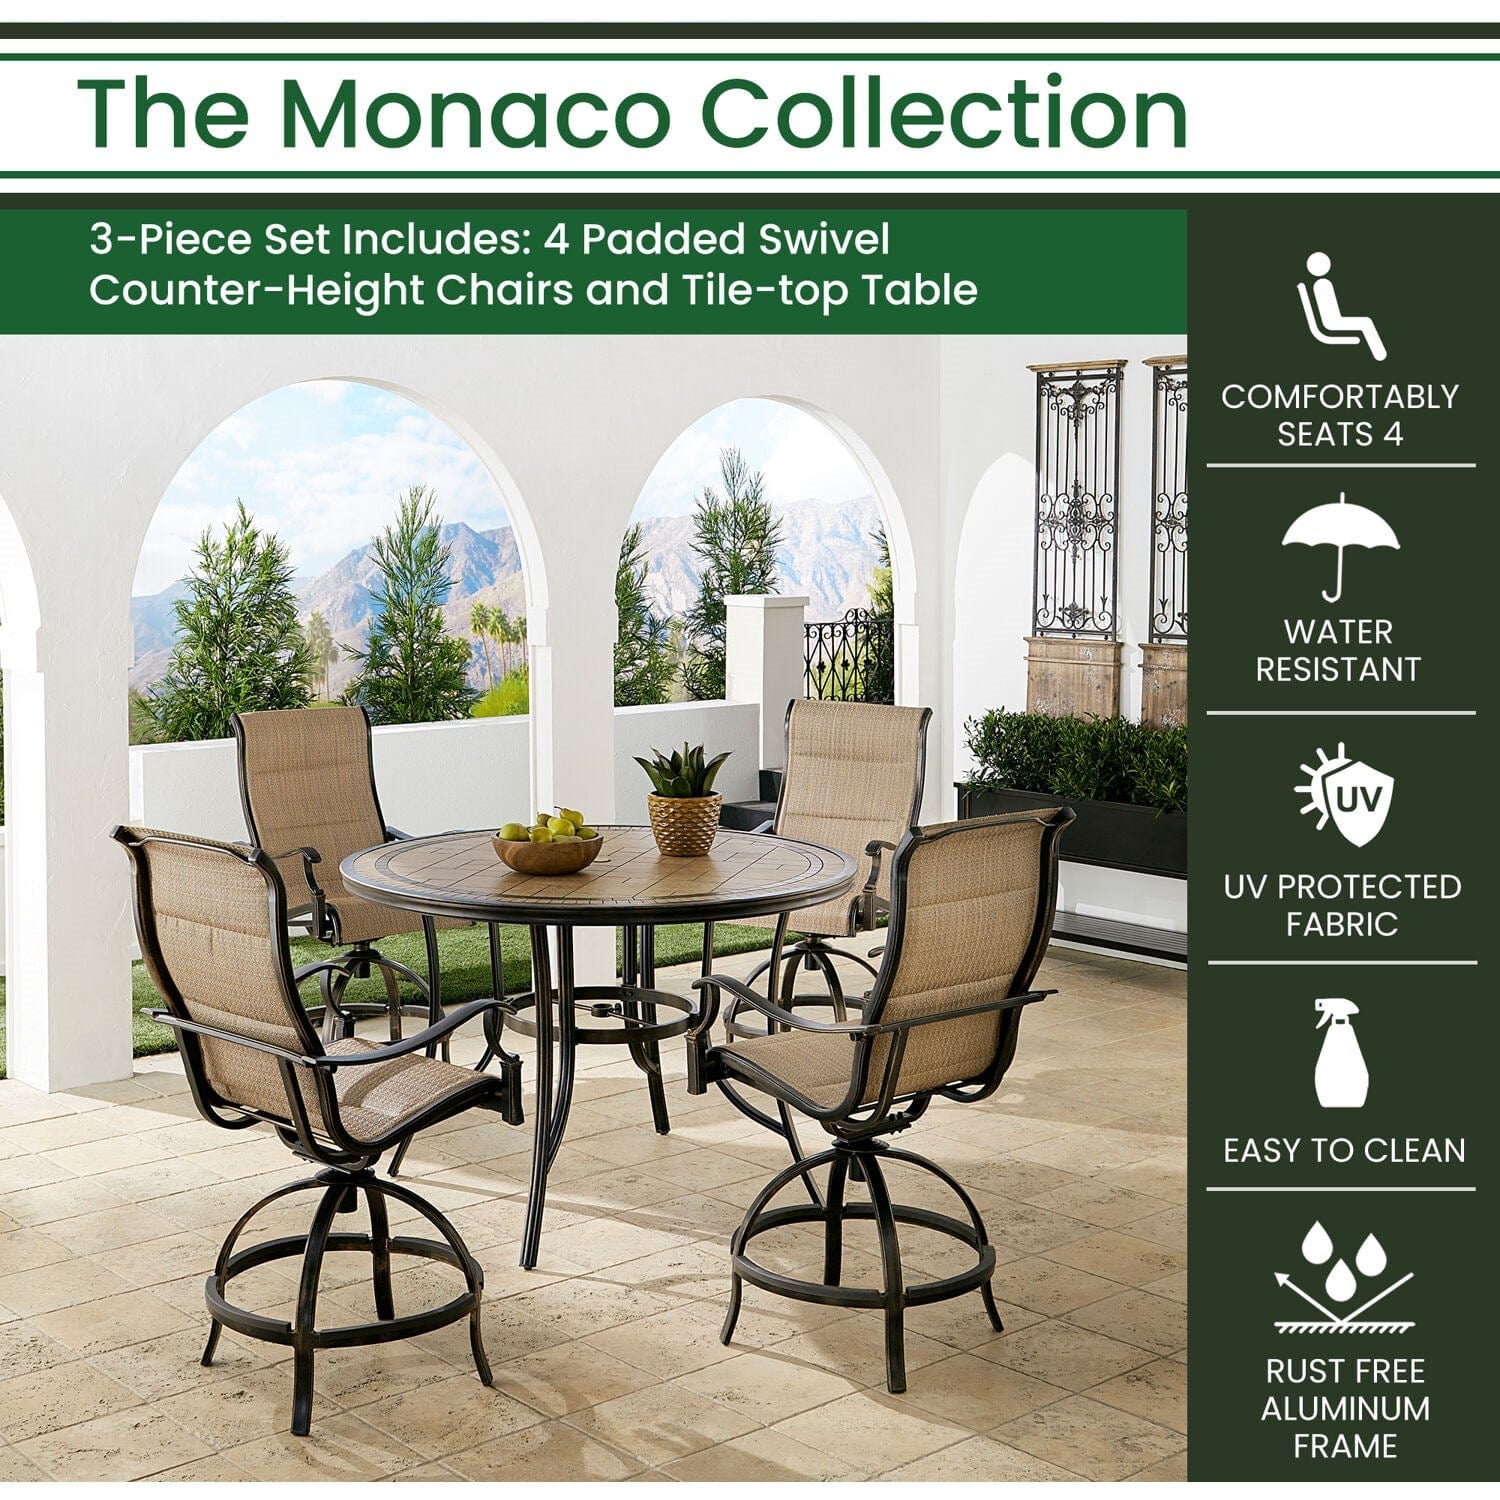 Hanover Outdoor Dining Set Hanover Monaco 5-Piece High-Dining Set in Tan with 4 Padded Counter-Height Swivel Chairs and a 56-In. Tile-Top Table | MONDN5PCPDBR-C-TAN